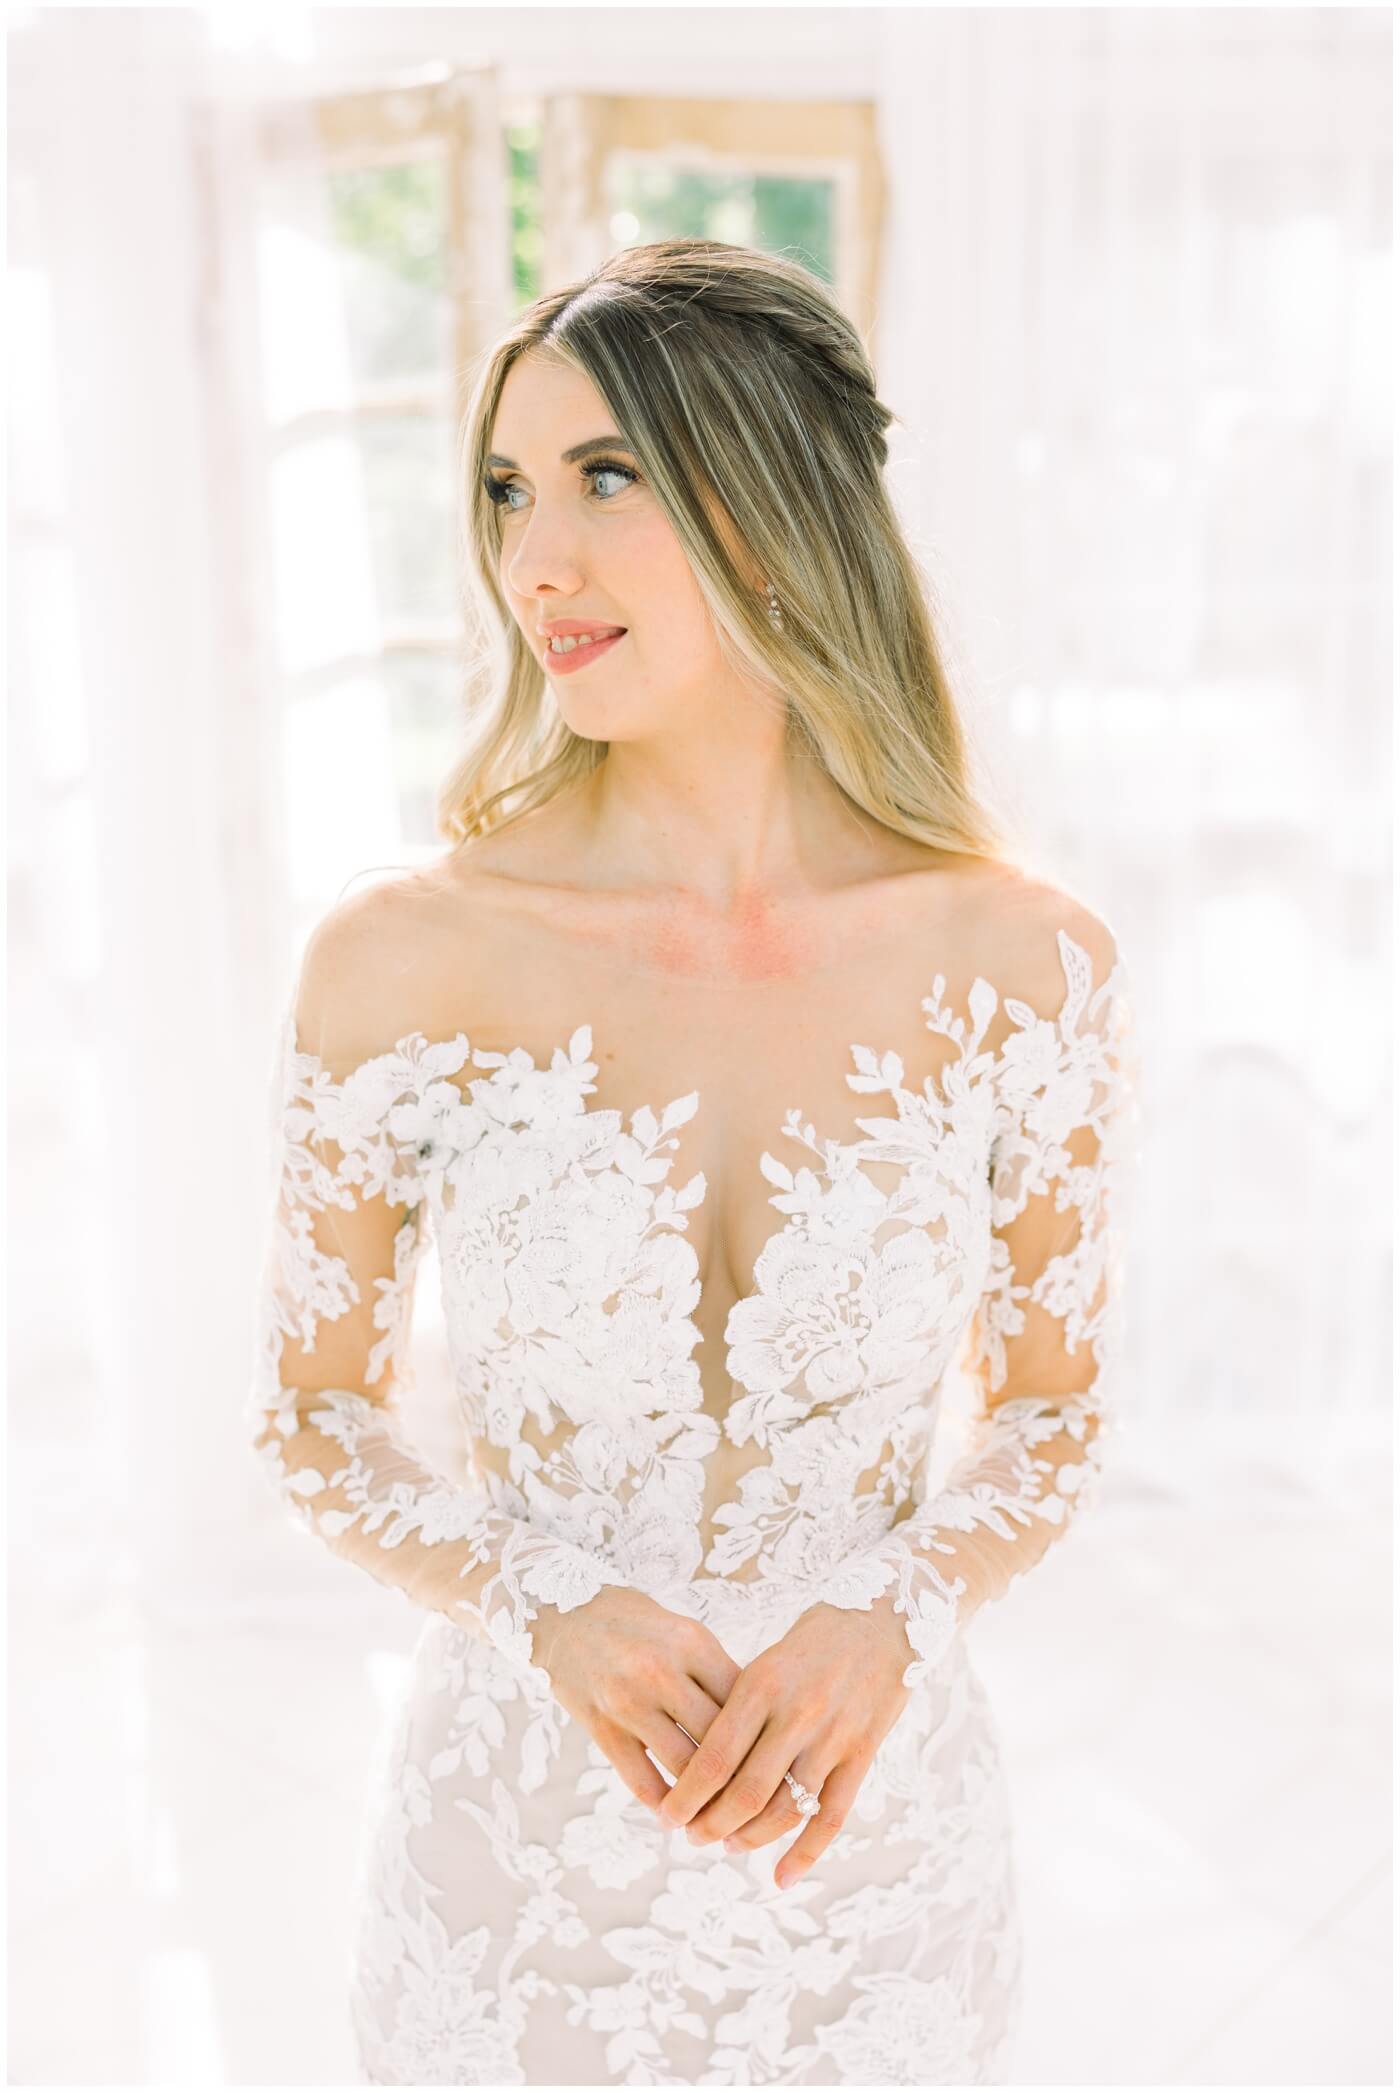 Wedding photographer in Houston | A bride shows the beautiful lace design on her wedding dress